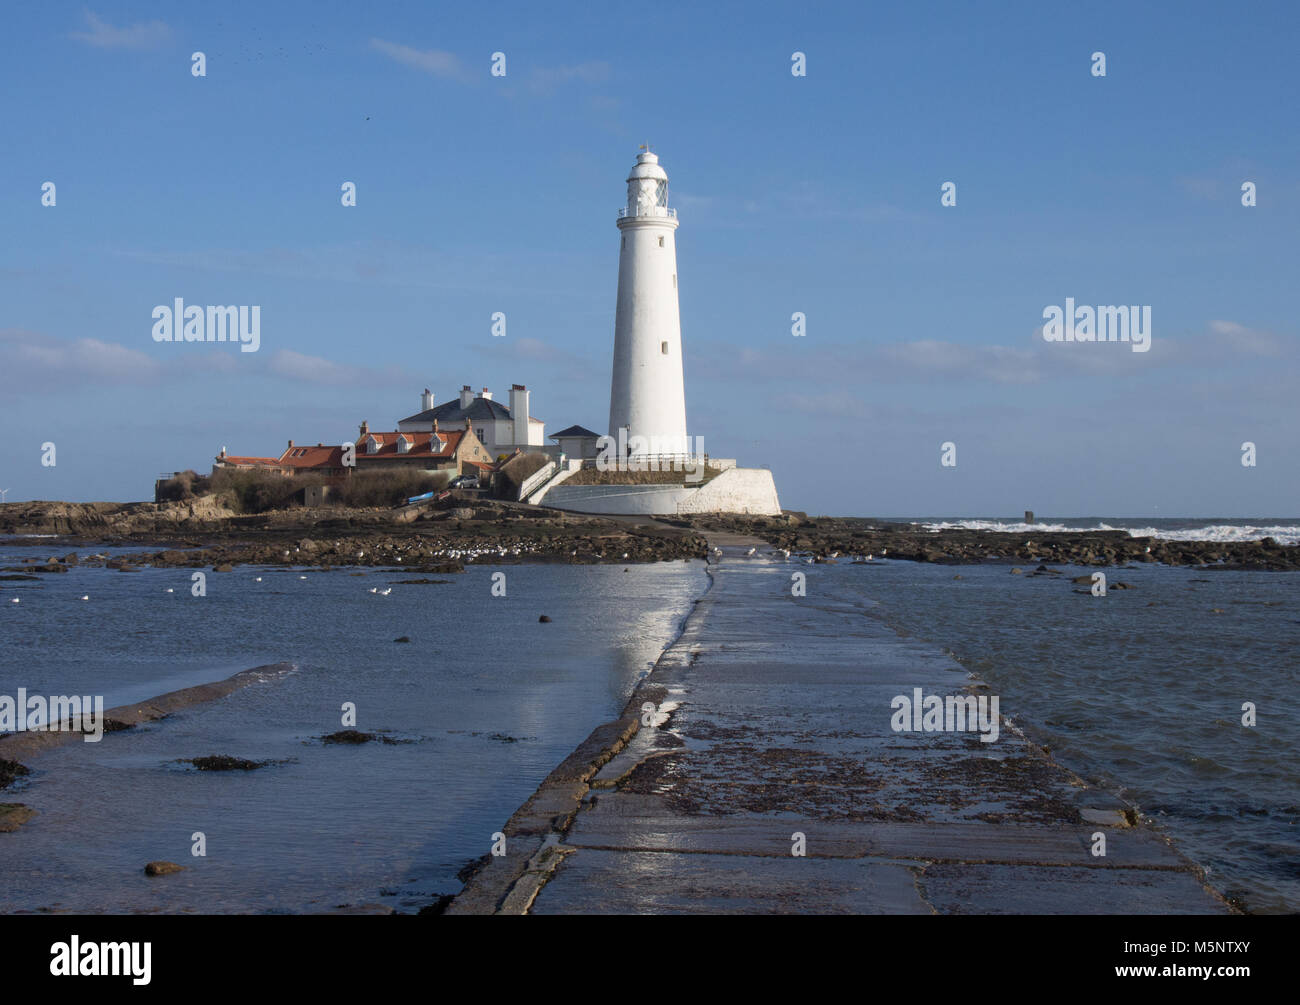 St Mary's Island, Whitley Bay, Northumberland, a bright and windy winter morning. The Lighthouse. Stock Photo